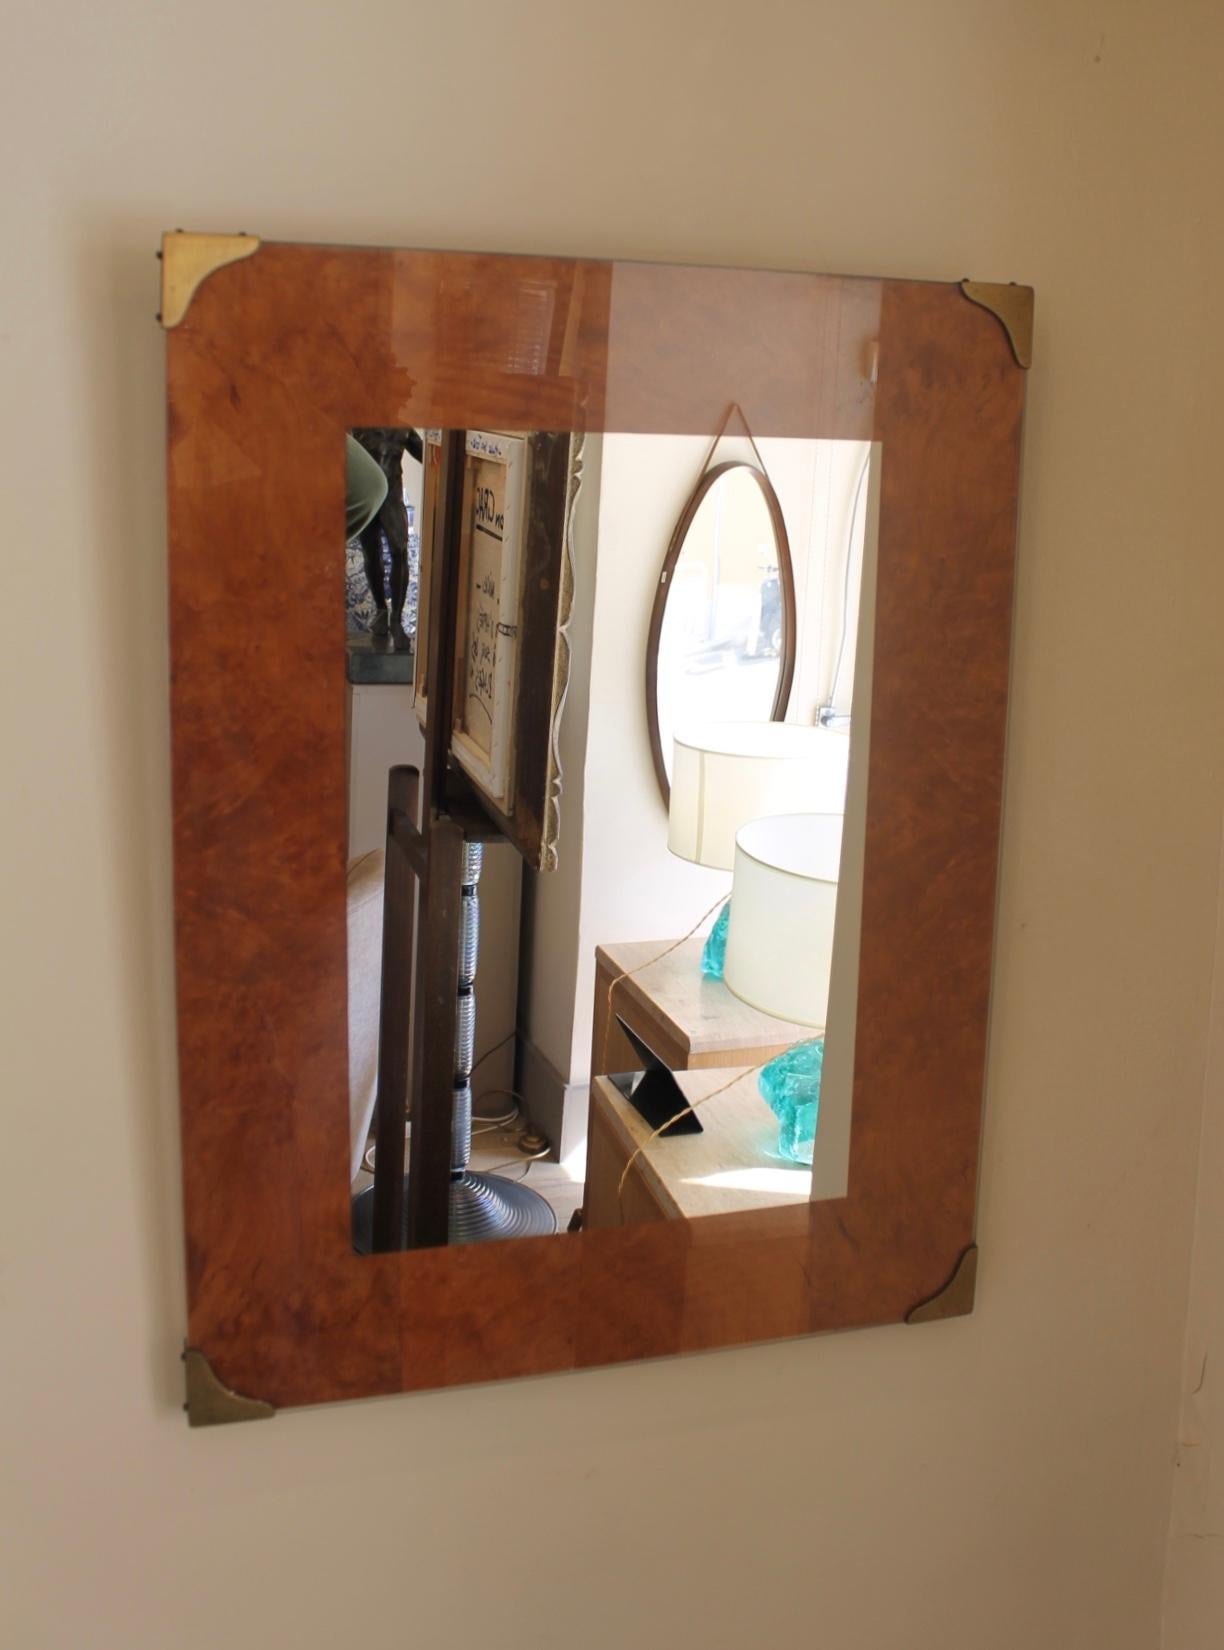 Rectangular mirror in speckled maple from the 1970s in the style of Willy Rizzo. In the center a mirror. Four in brass.

Beautiful workmanship. Very good above a chest of drawers or console.